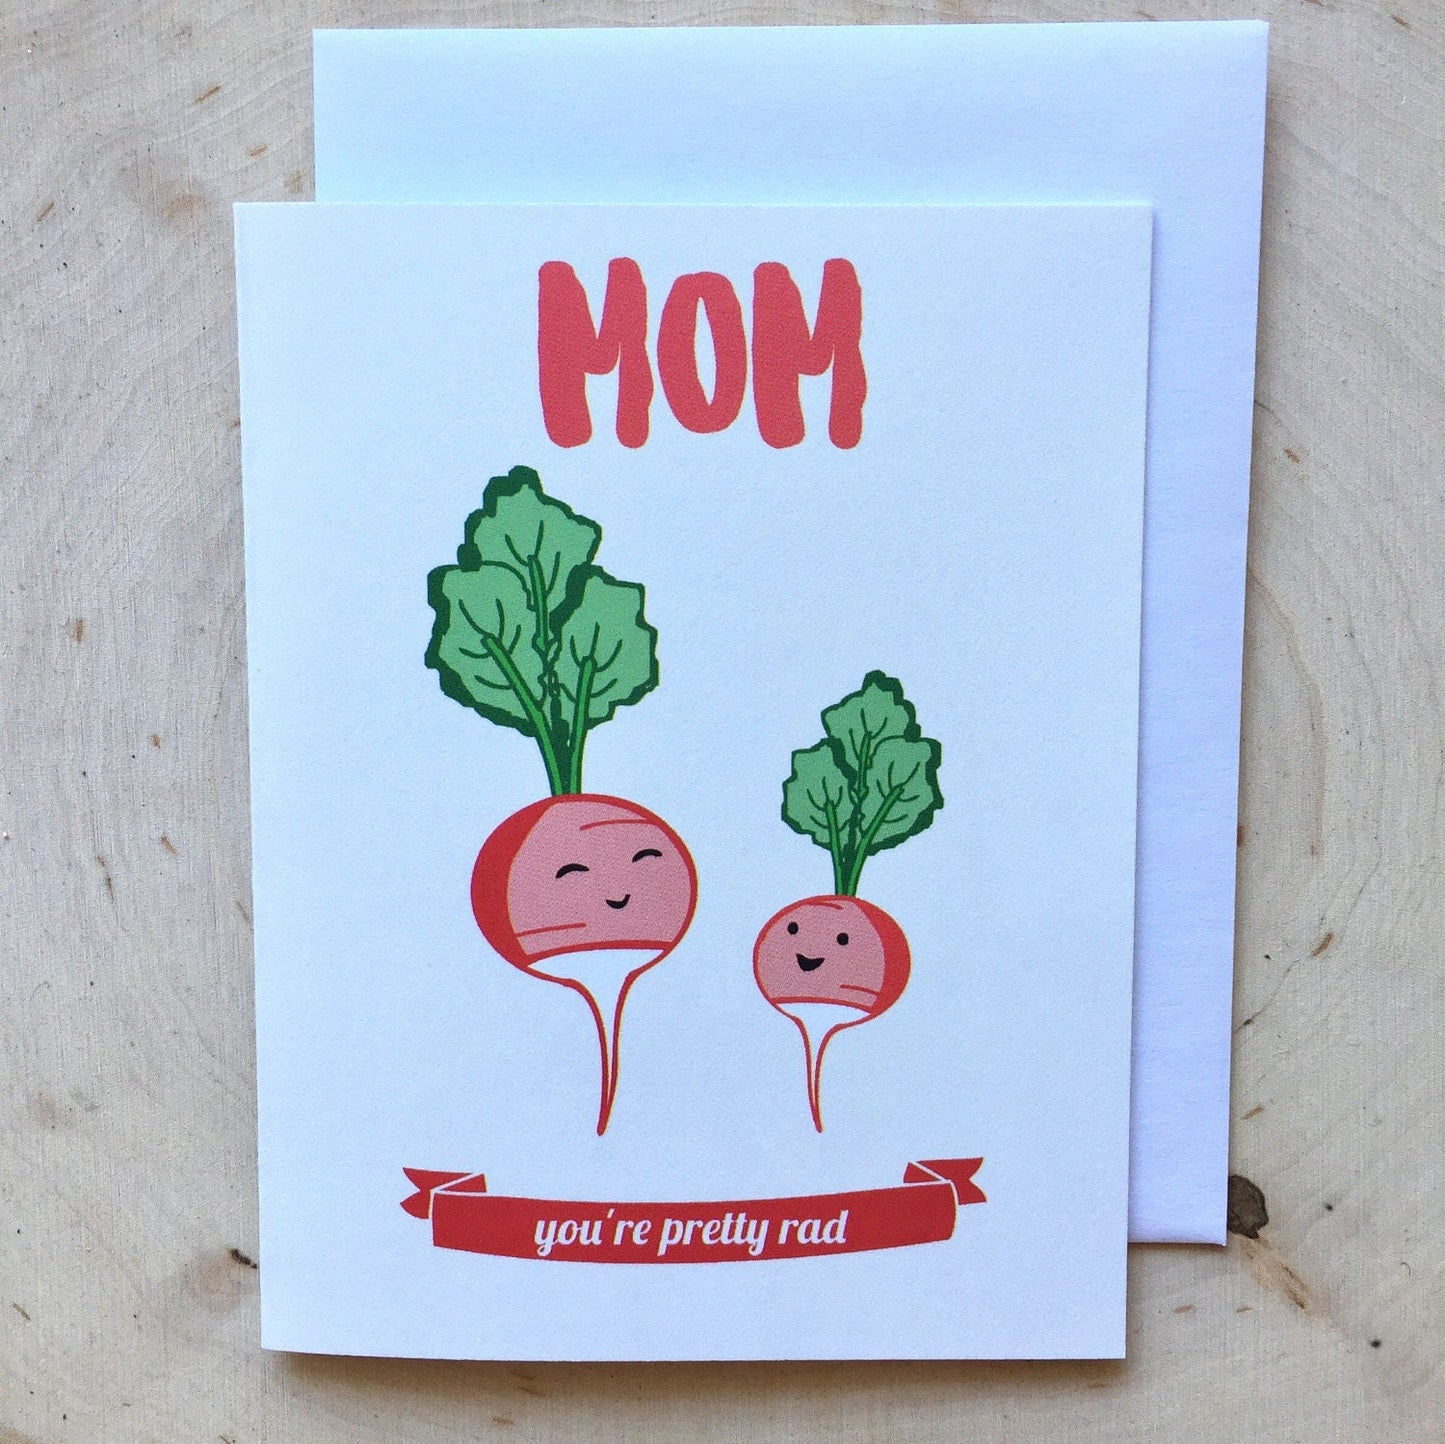 Radish Mom Card - Mothers Day Card, Mom birthday card, gift for mom, punny mother card